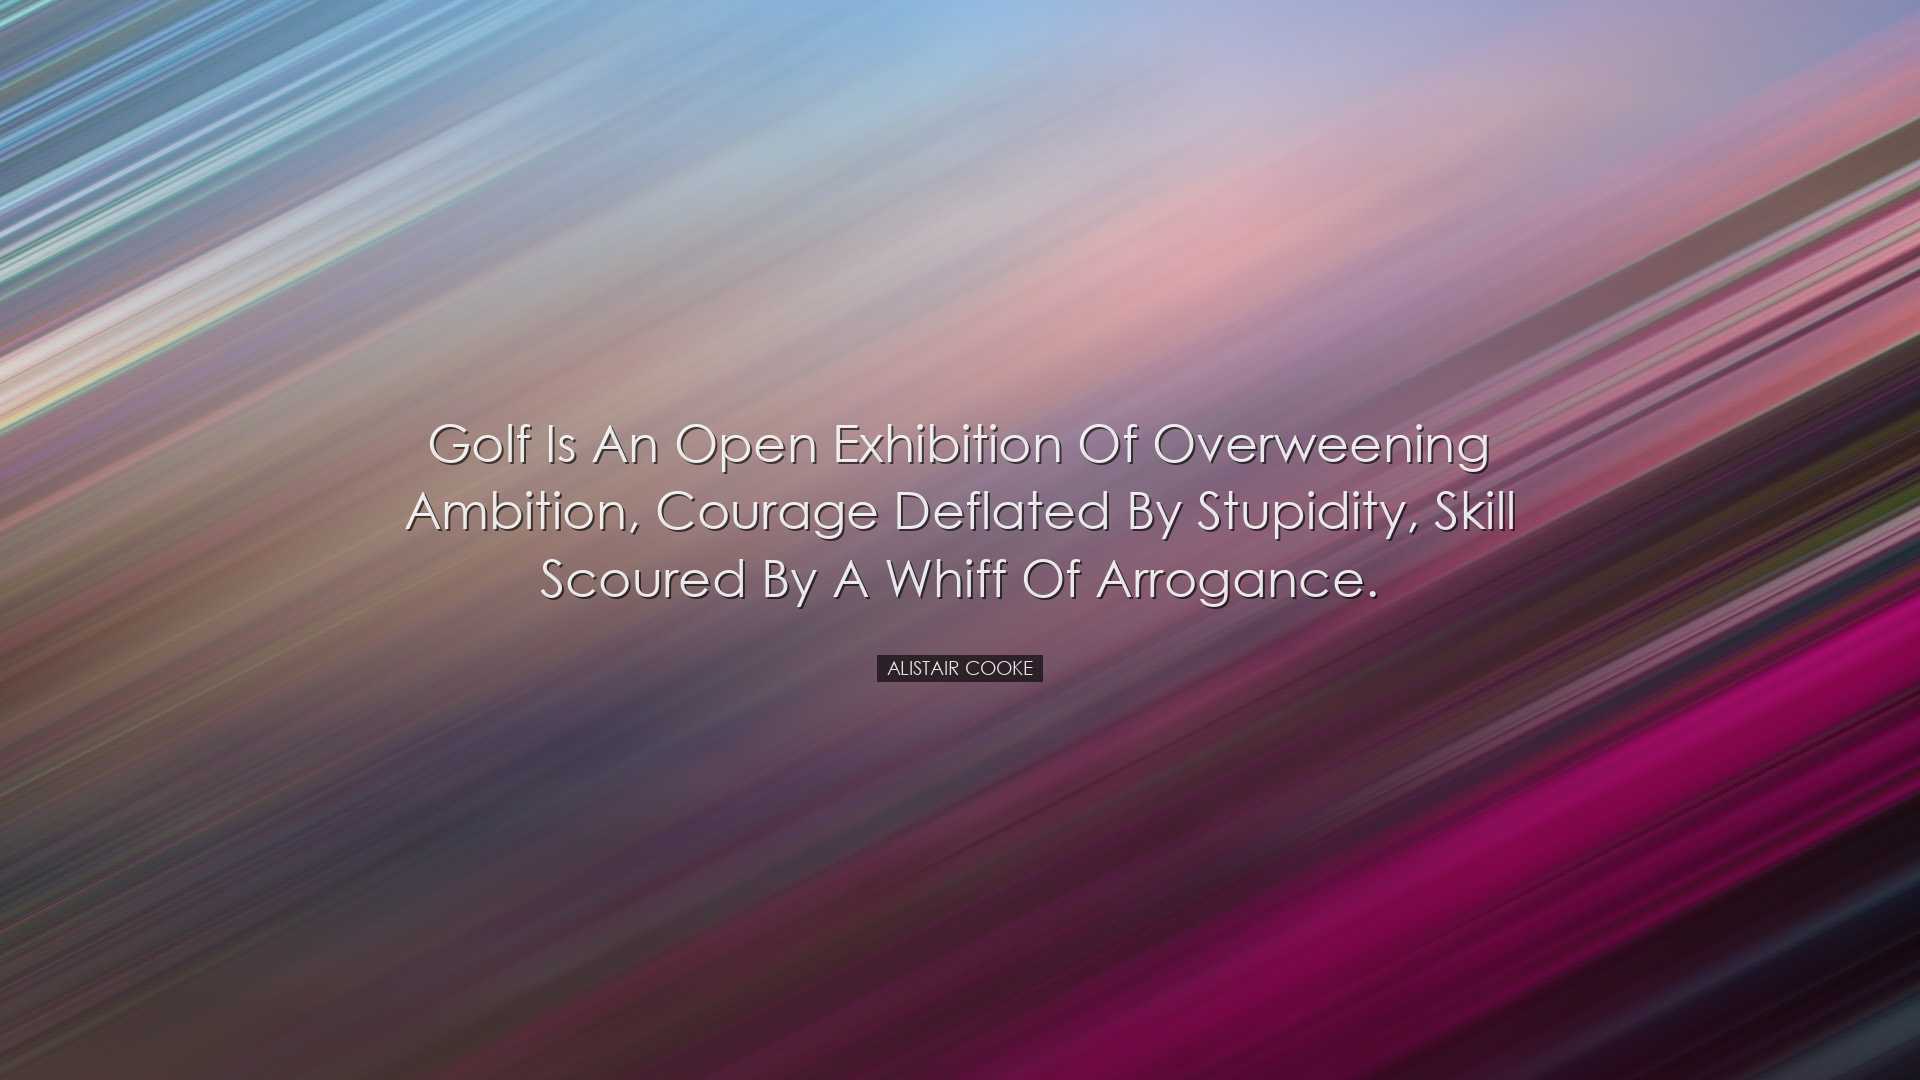 Golf is an open exhibition of overweening ambition, courage deflat